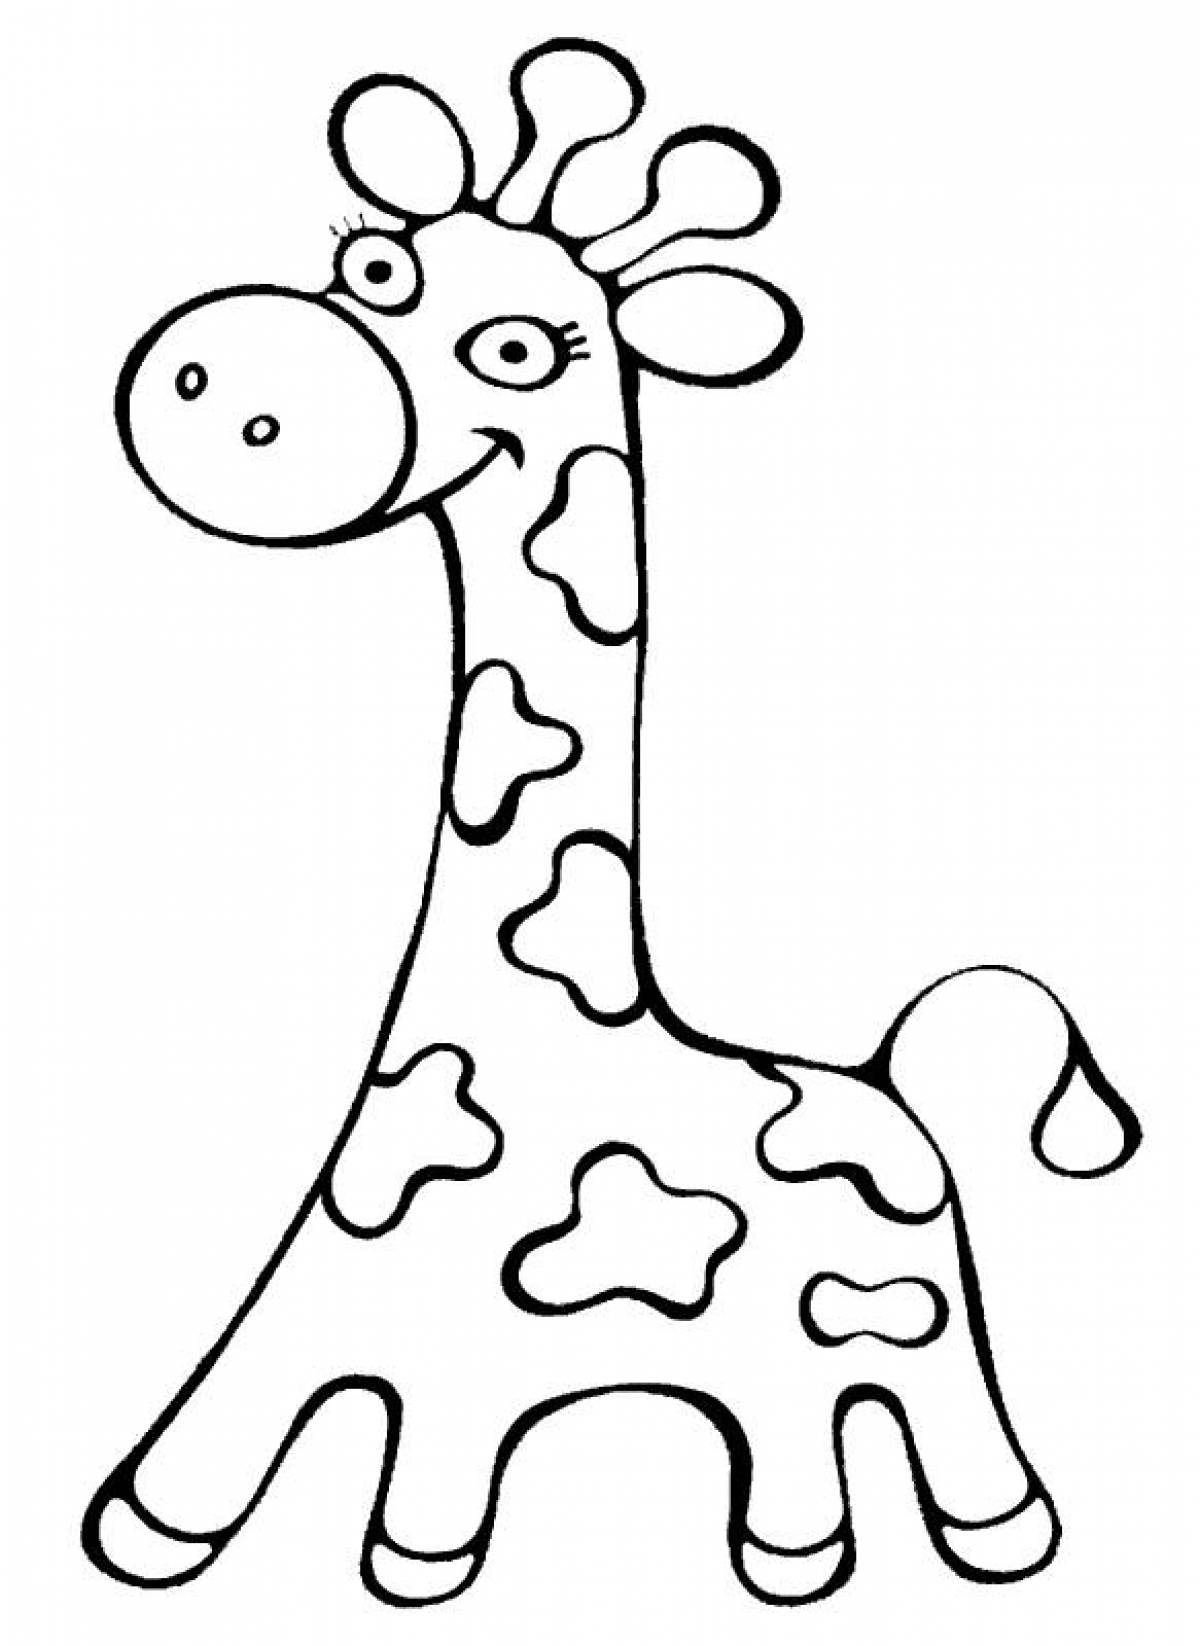 Coloring pages for children 2-3 years old